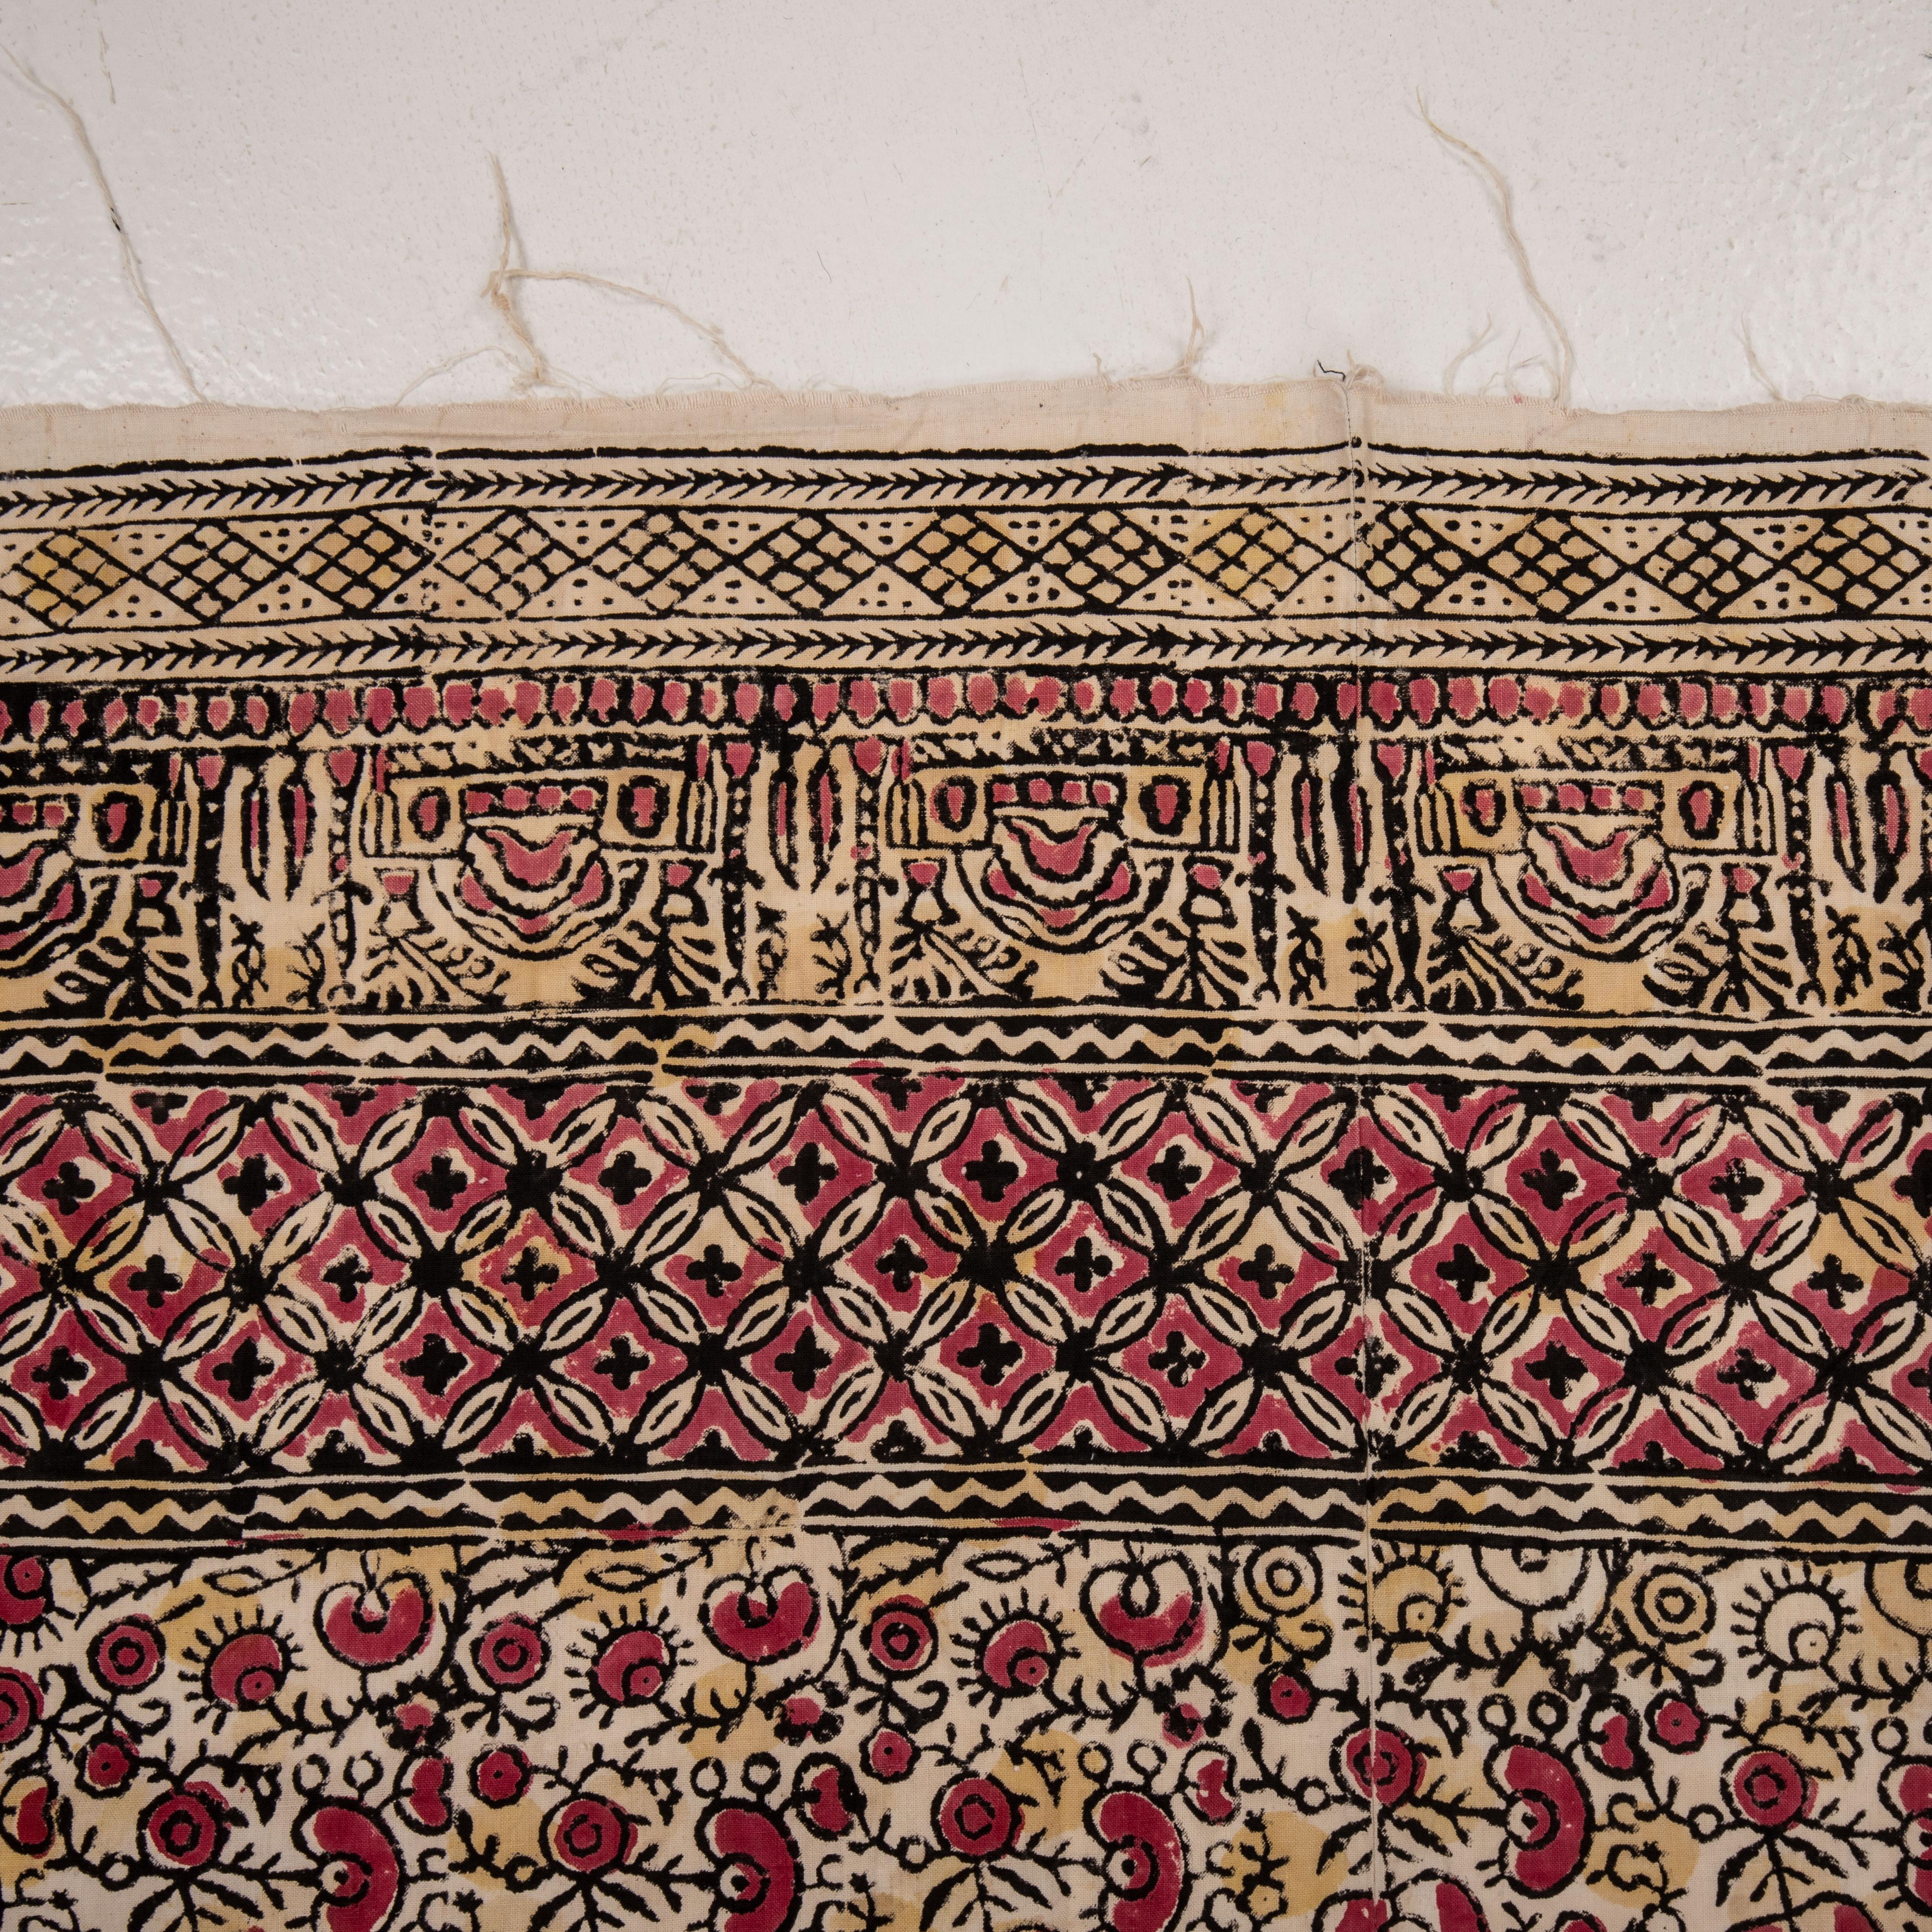 Cotton West Anatolian Rustic Hand Block Printed Quilt Top, Early 20th C. For Sale